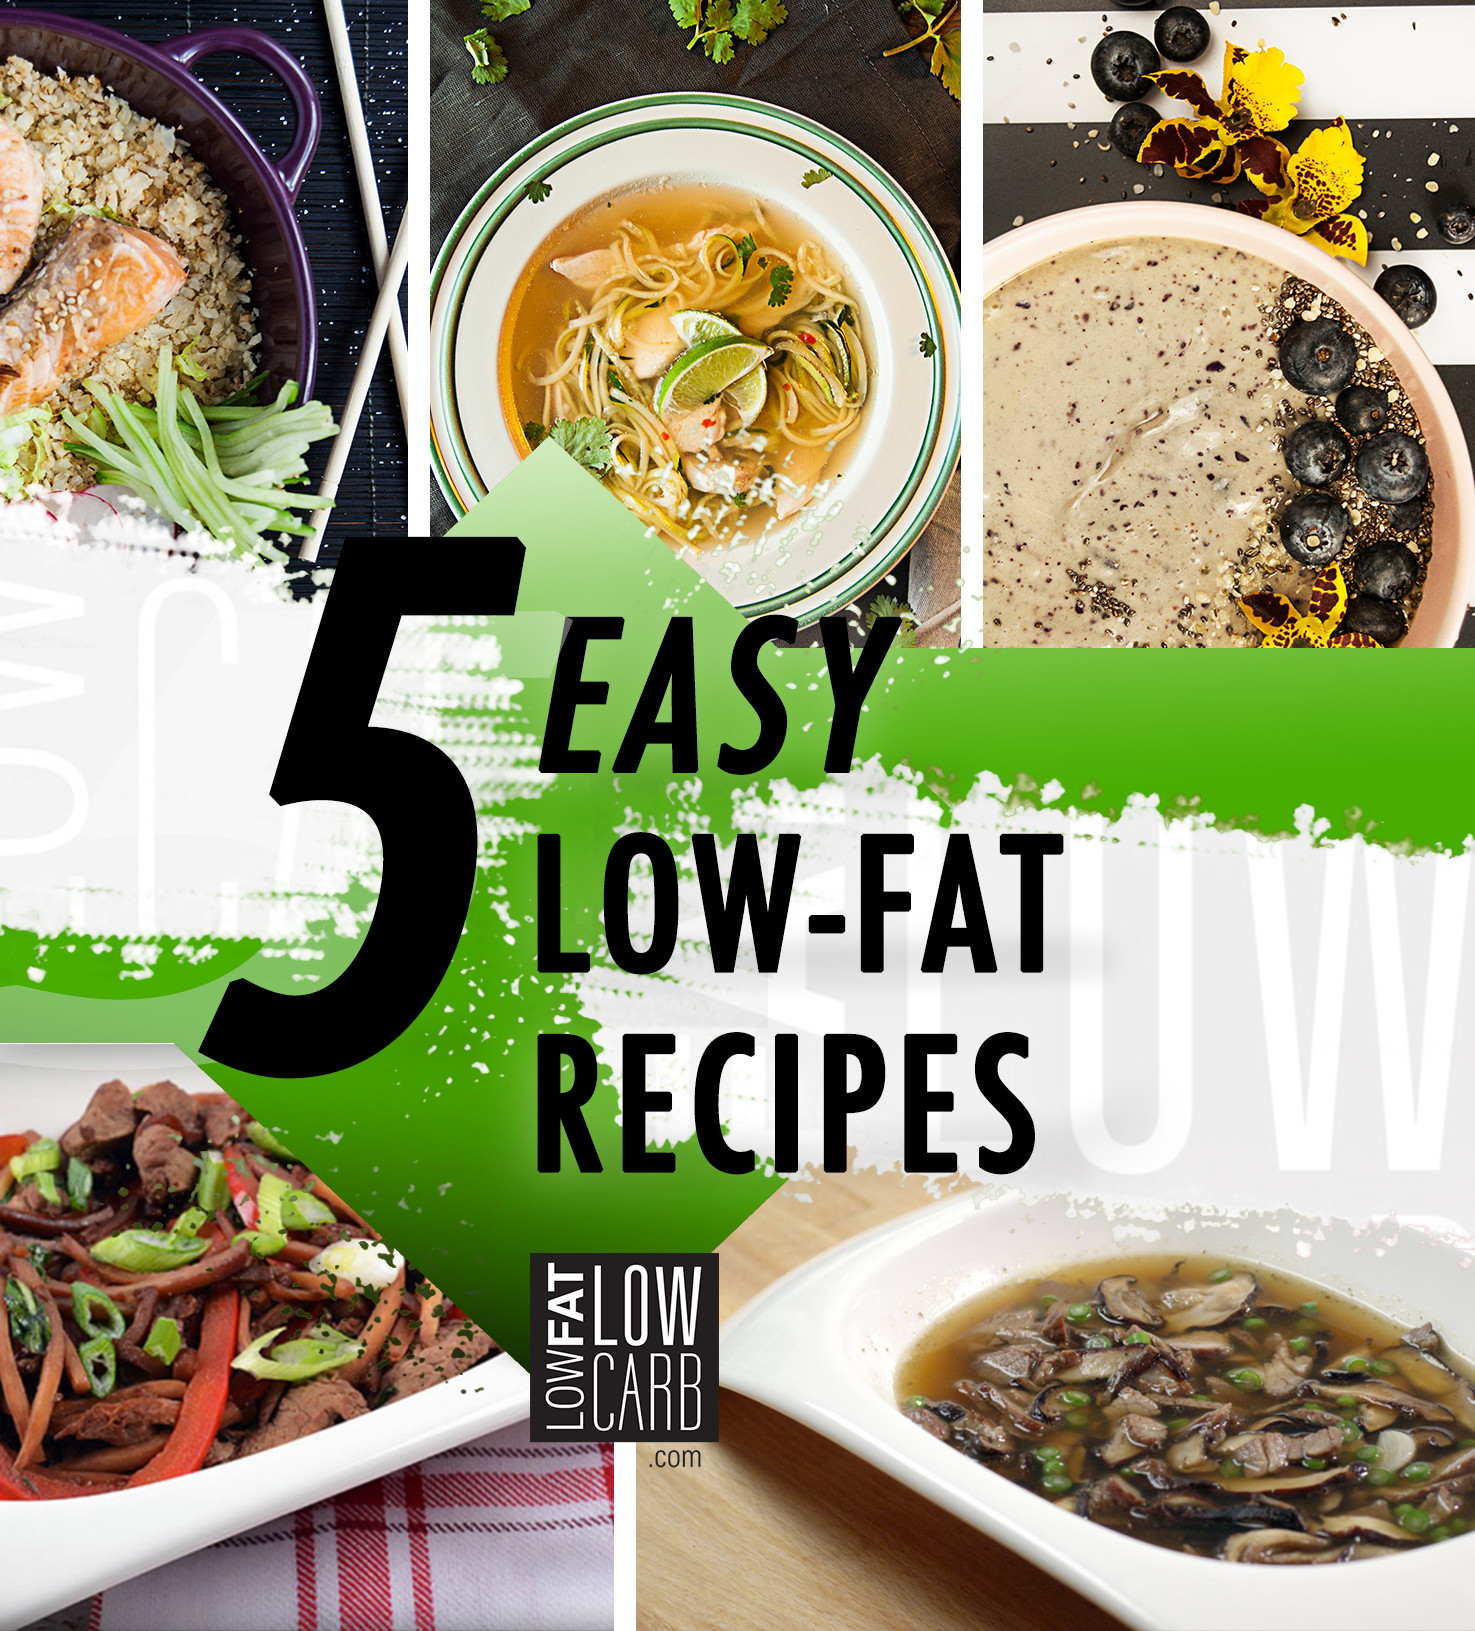 Low Fat Foods Recipes
 5 Low Fat Diet Recipes for a Healthy Start Low Fat Low Carb